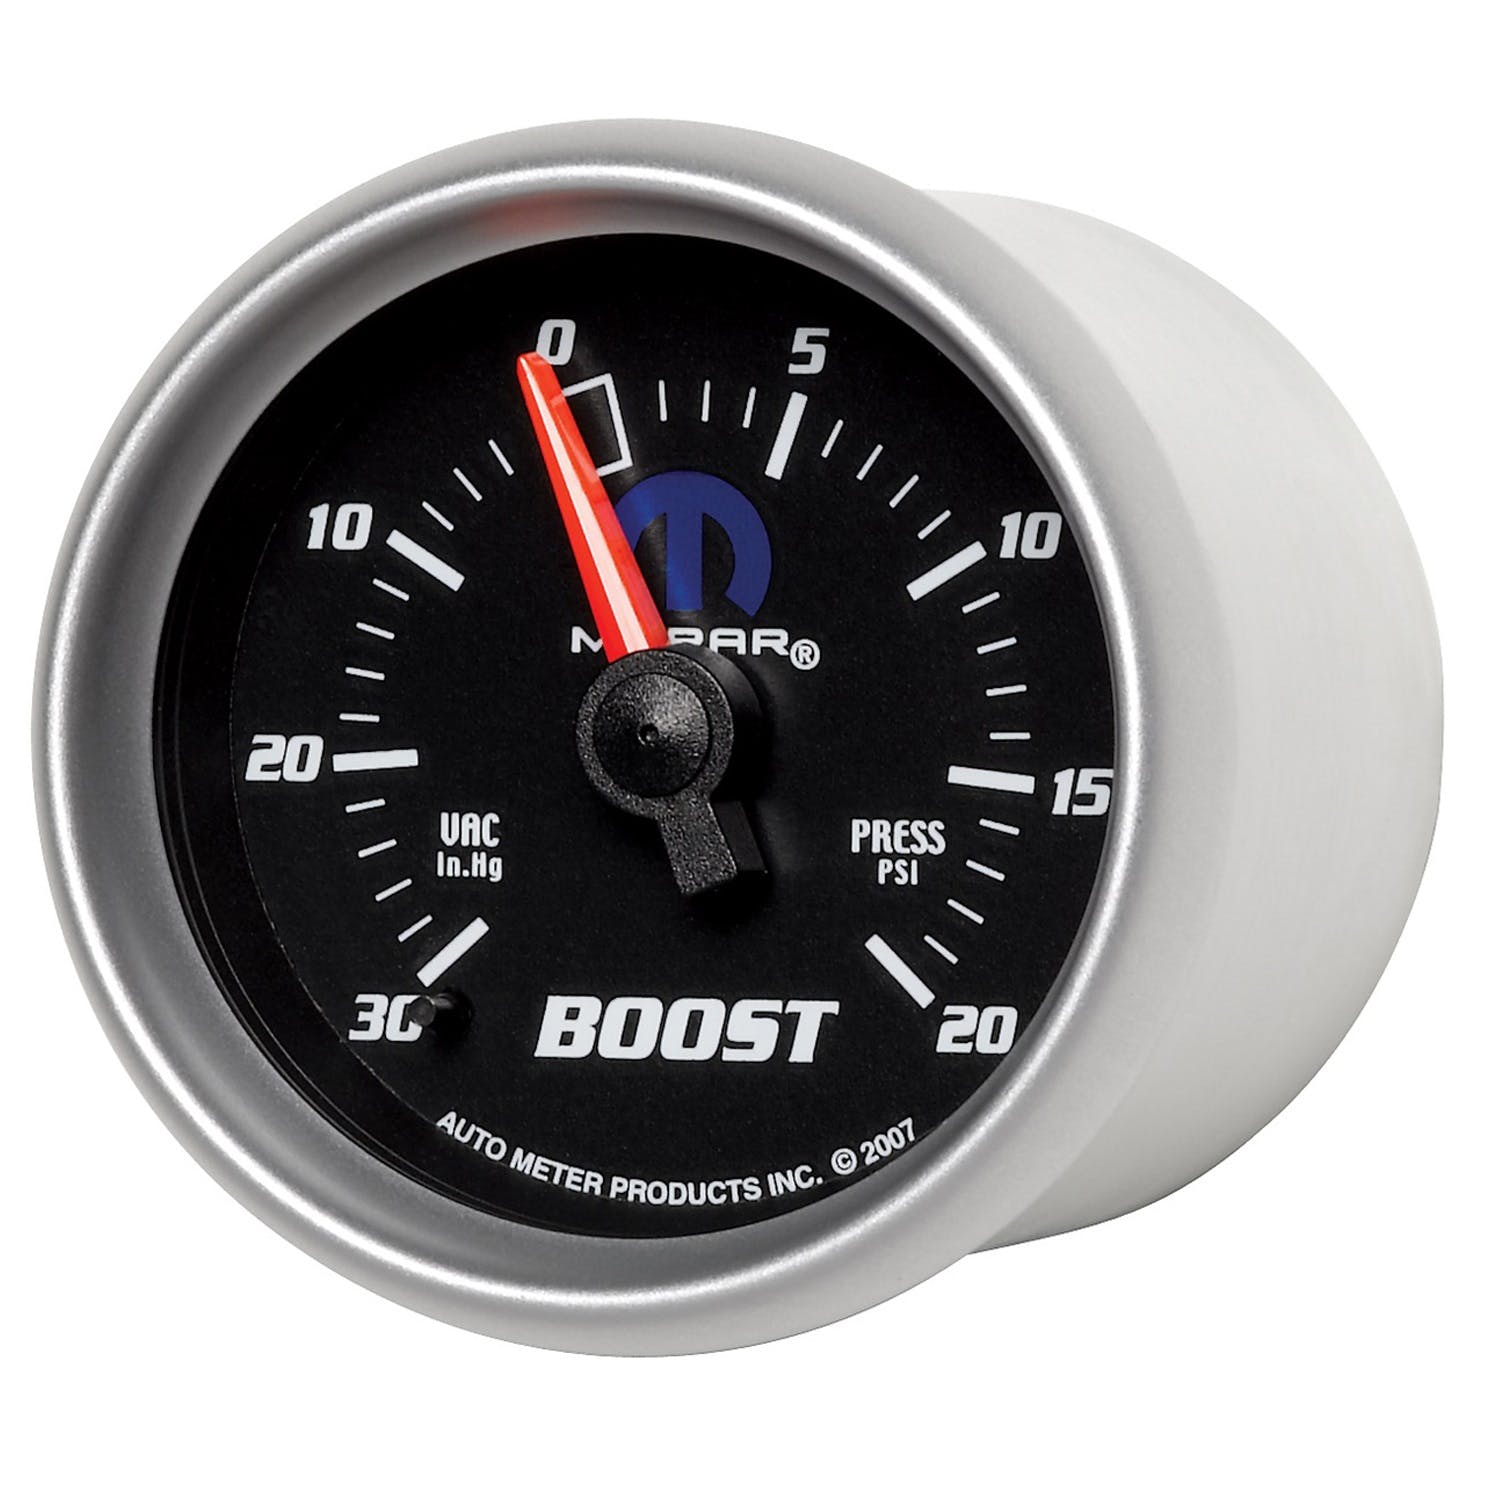 AutoMeter Products 880012 Mopar Mechanical Boost/Vacuum Gauge 2 1/16in. 30in. Hg./20 psi Incl. 6ft.